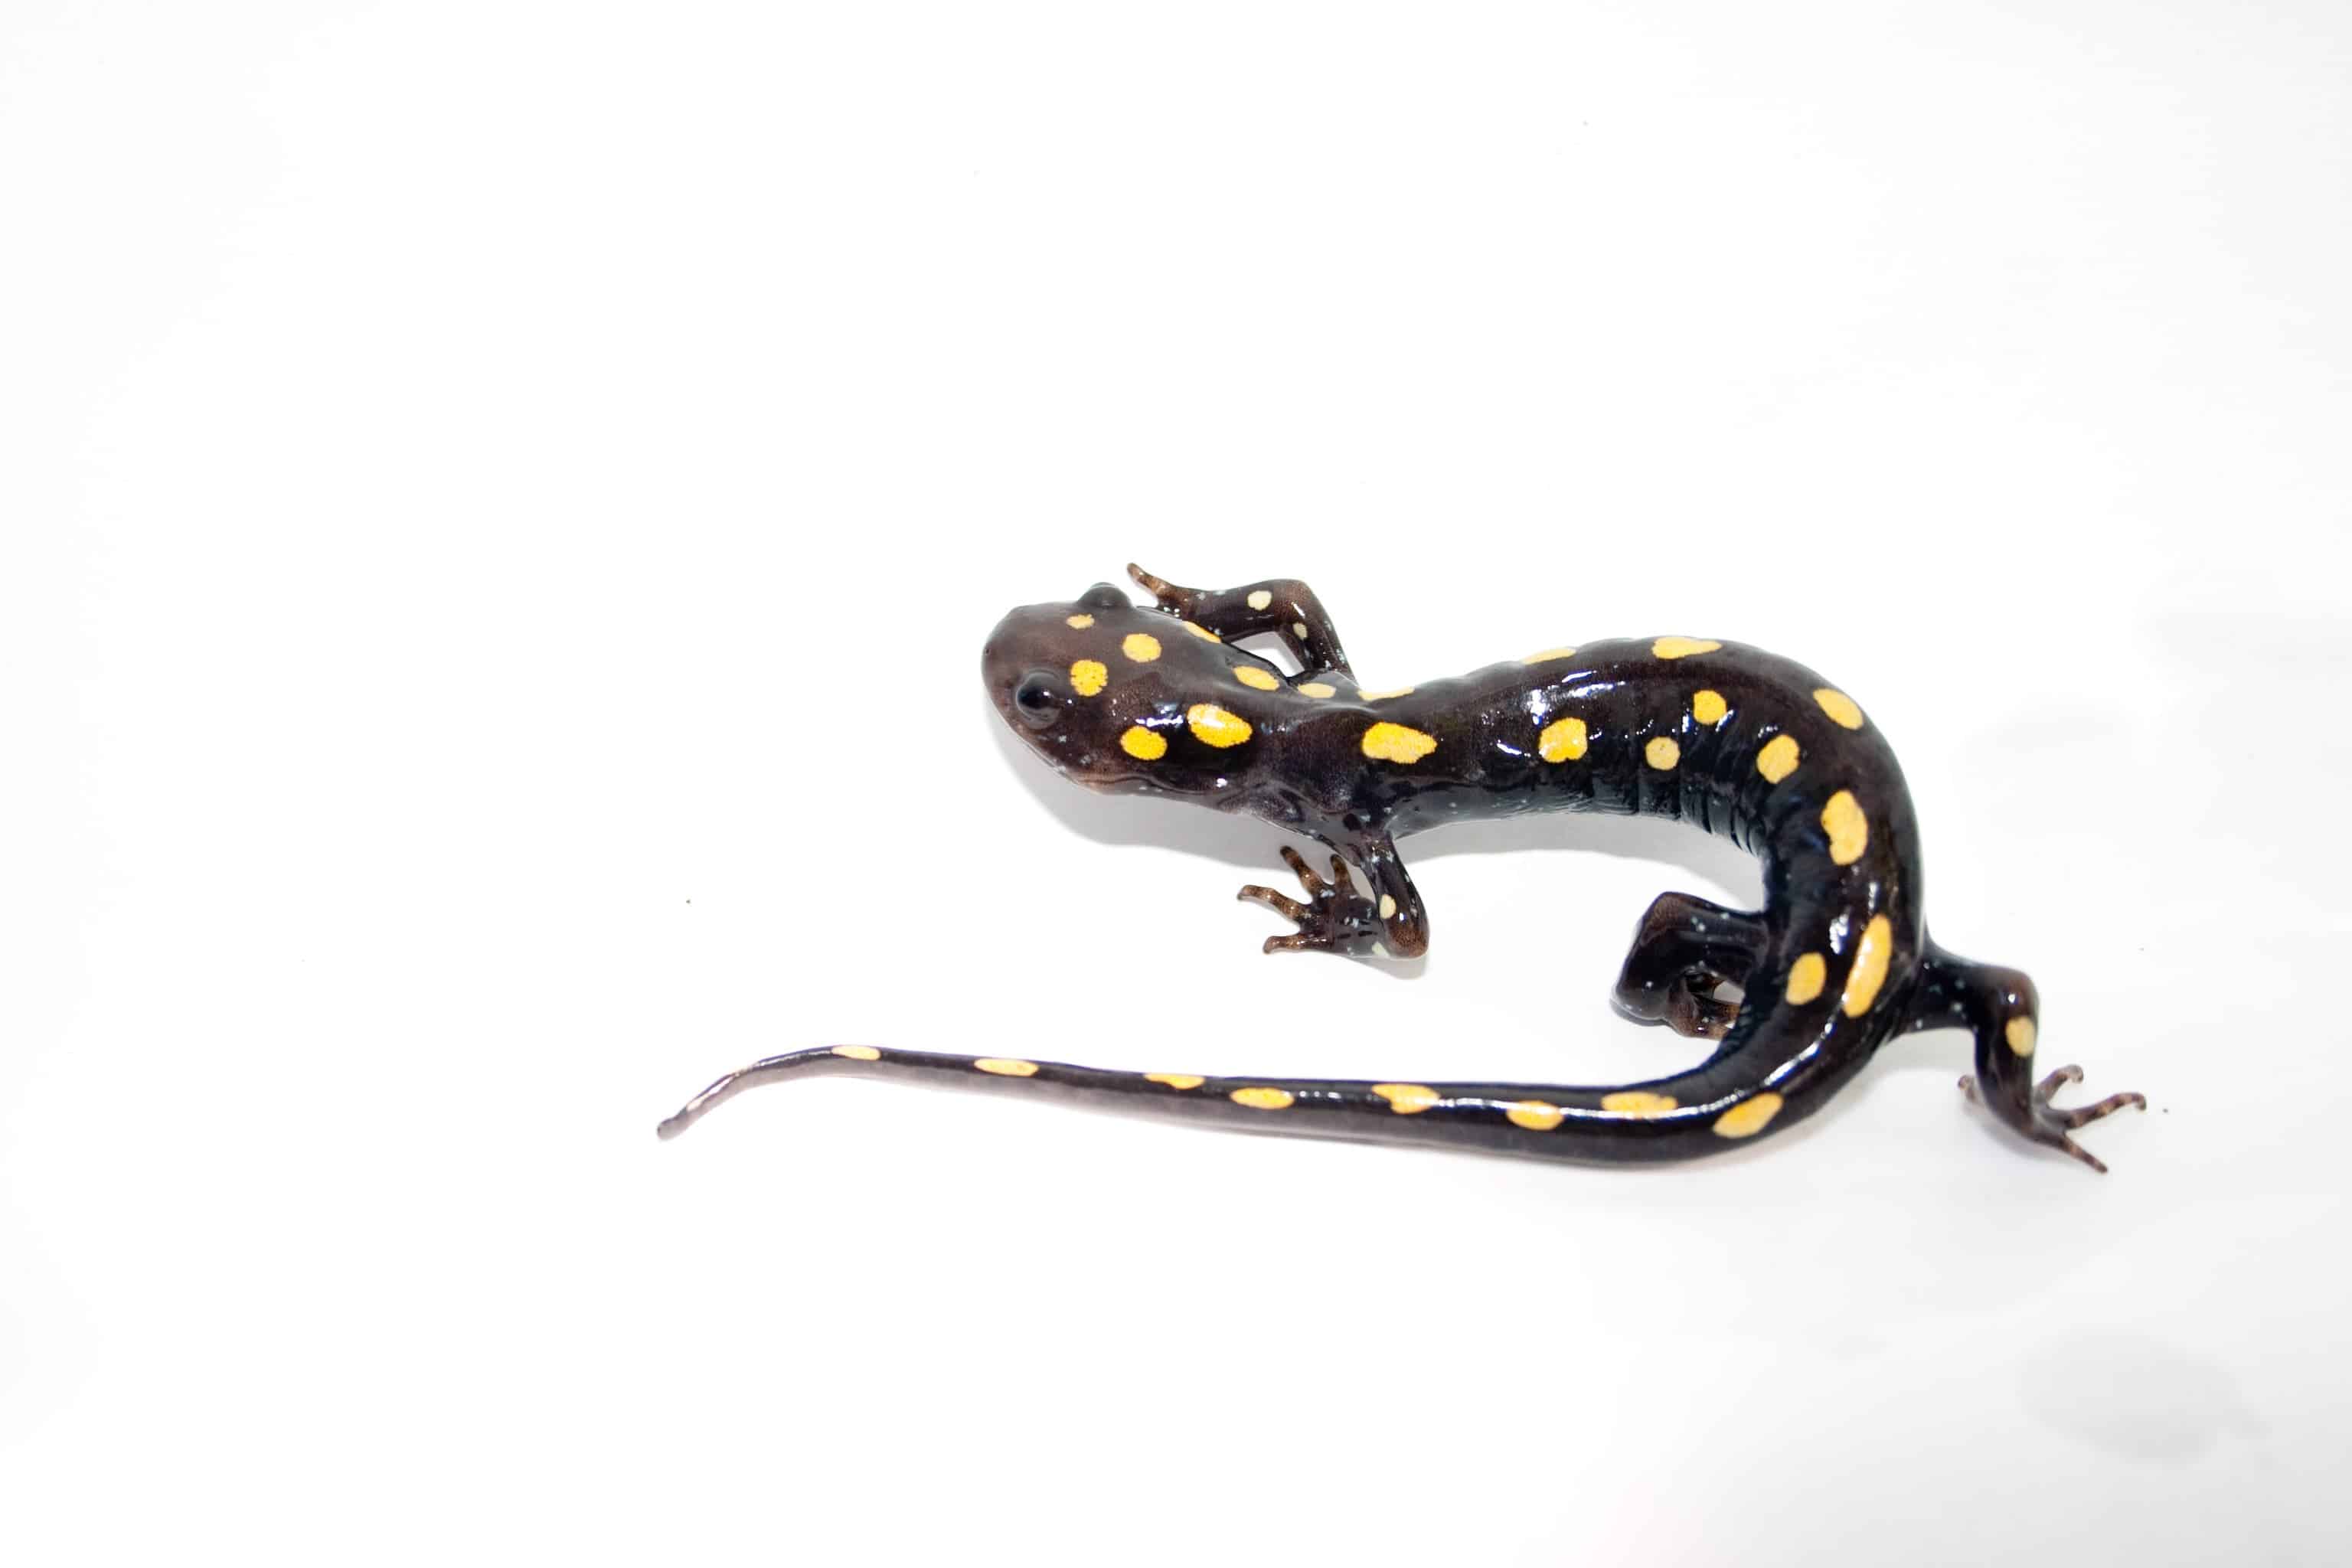 The yellow sotted salamander. Image credit: Brian Gratwicke.